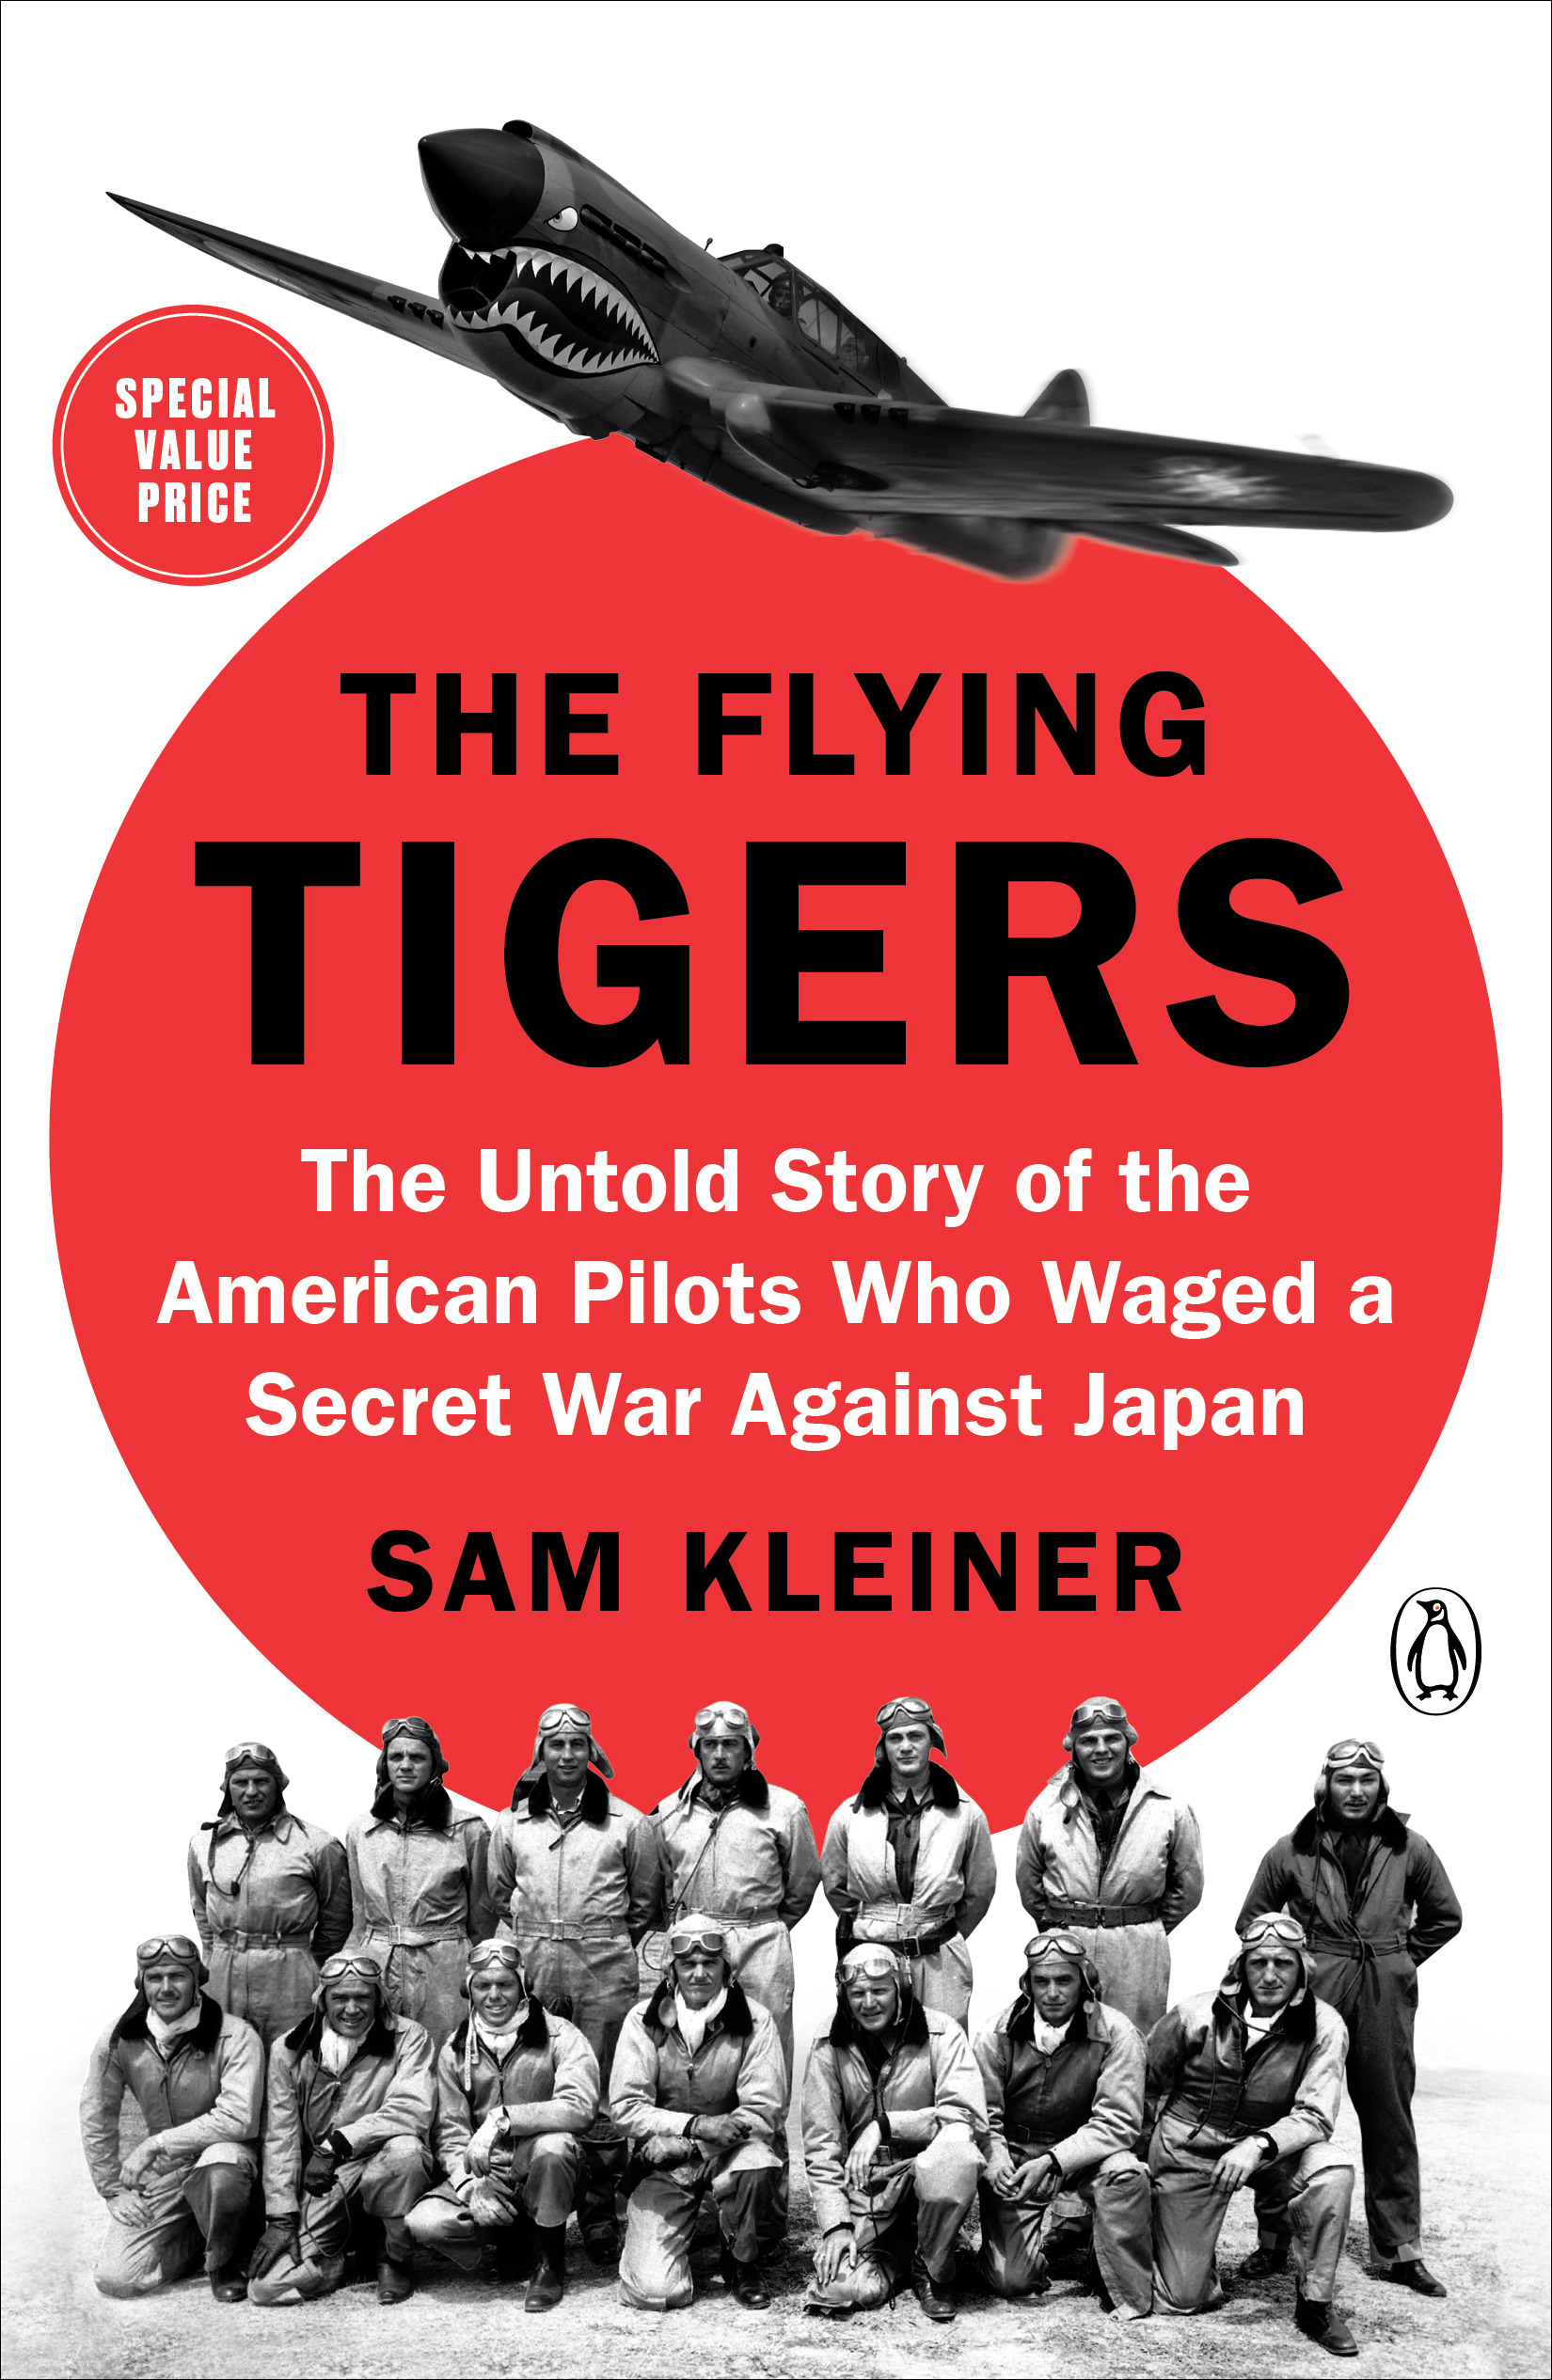 The Flying Tigers : The Untold Story of the American Pilots Who Waged a Secret War Against Japan | History & Society